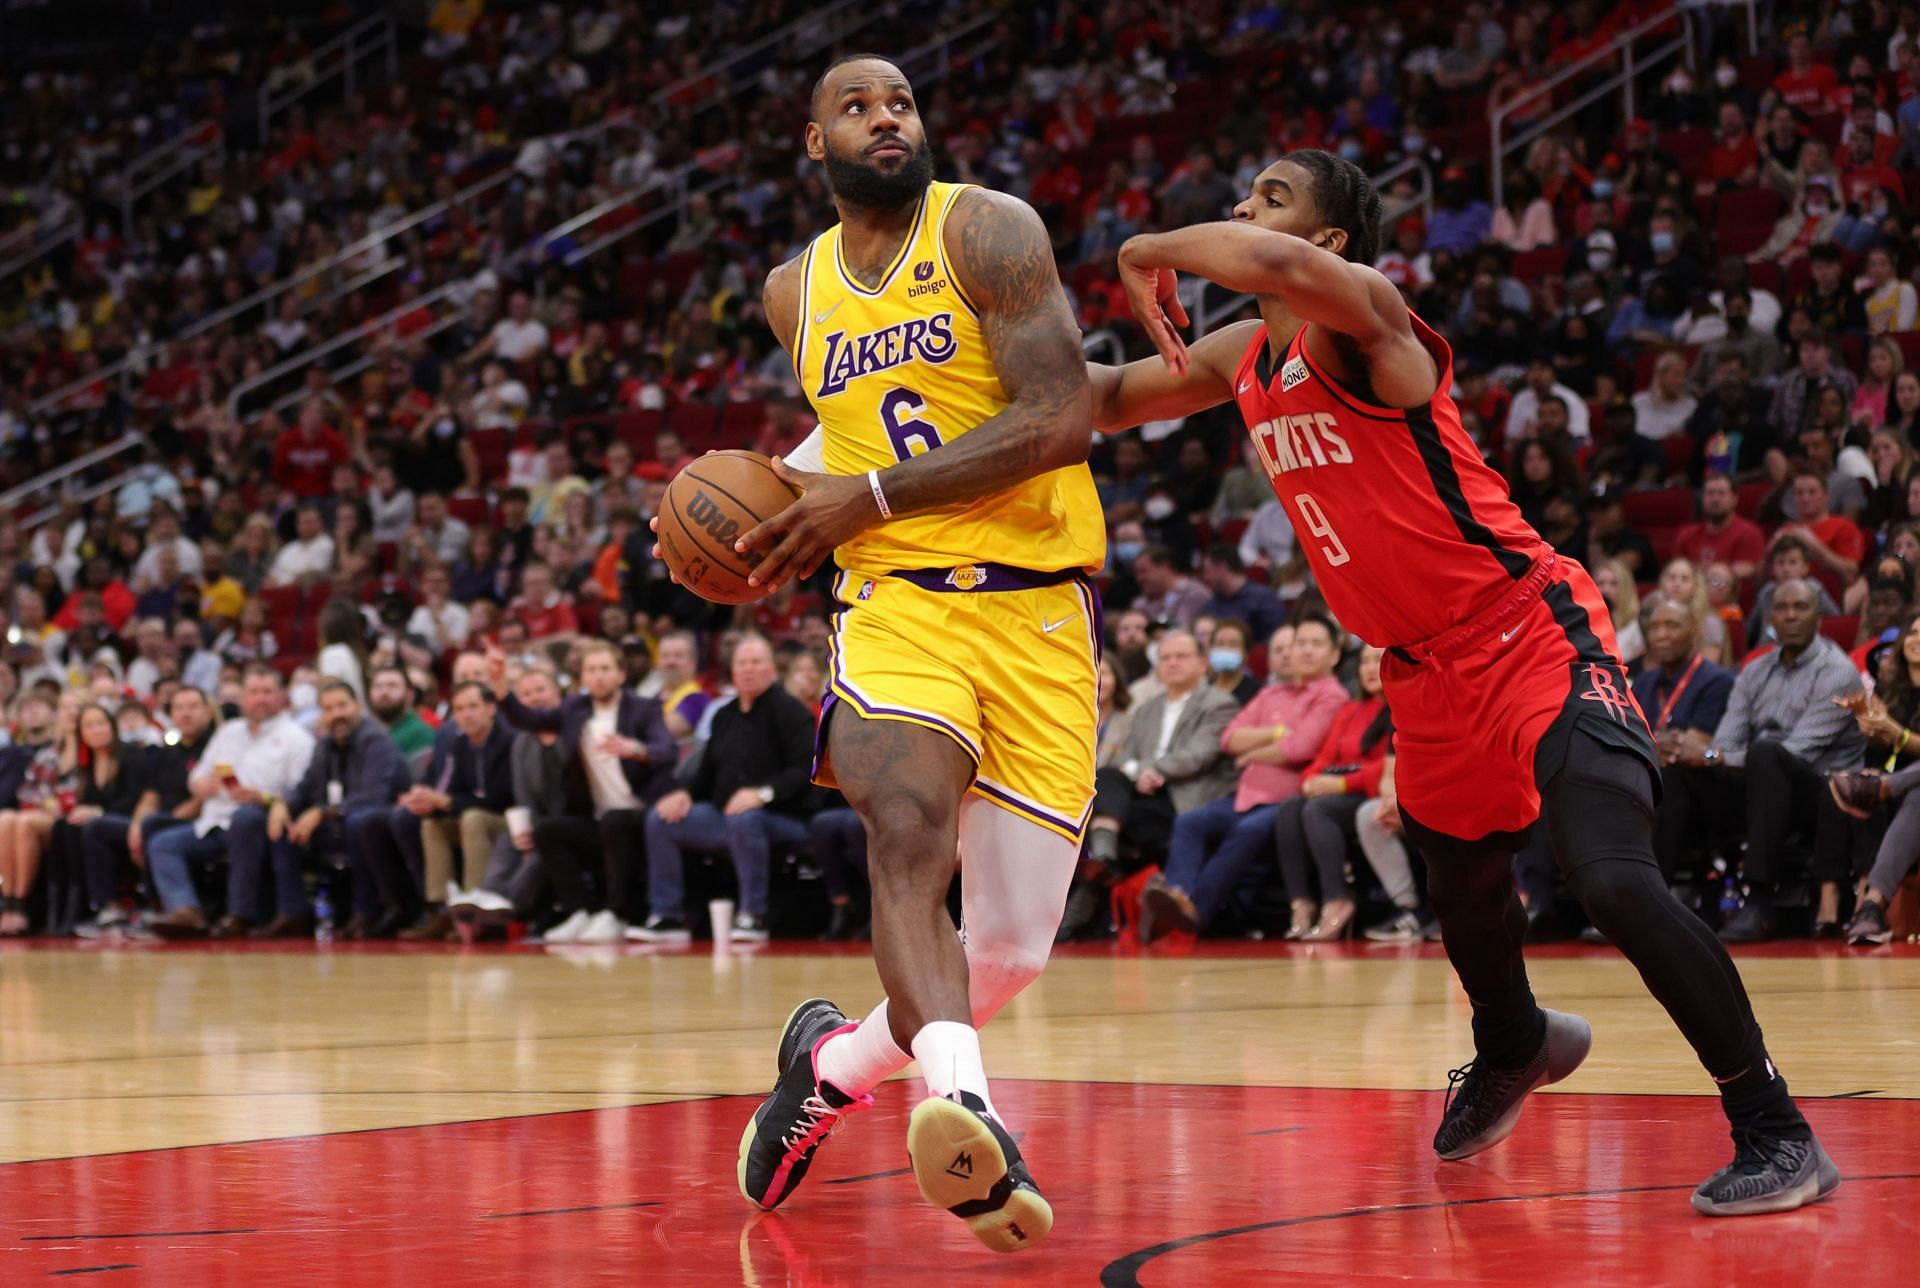 LeBron James of the LA Lakers against the Houston Rockets.